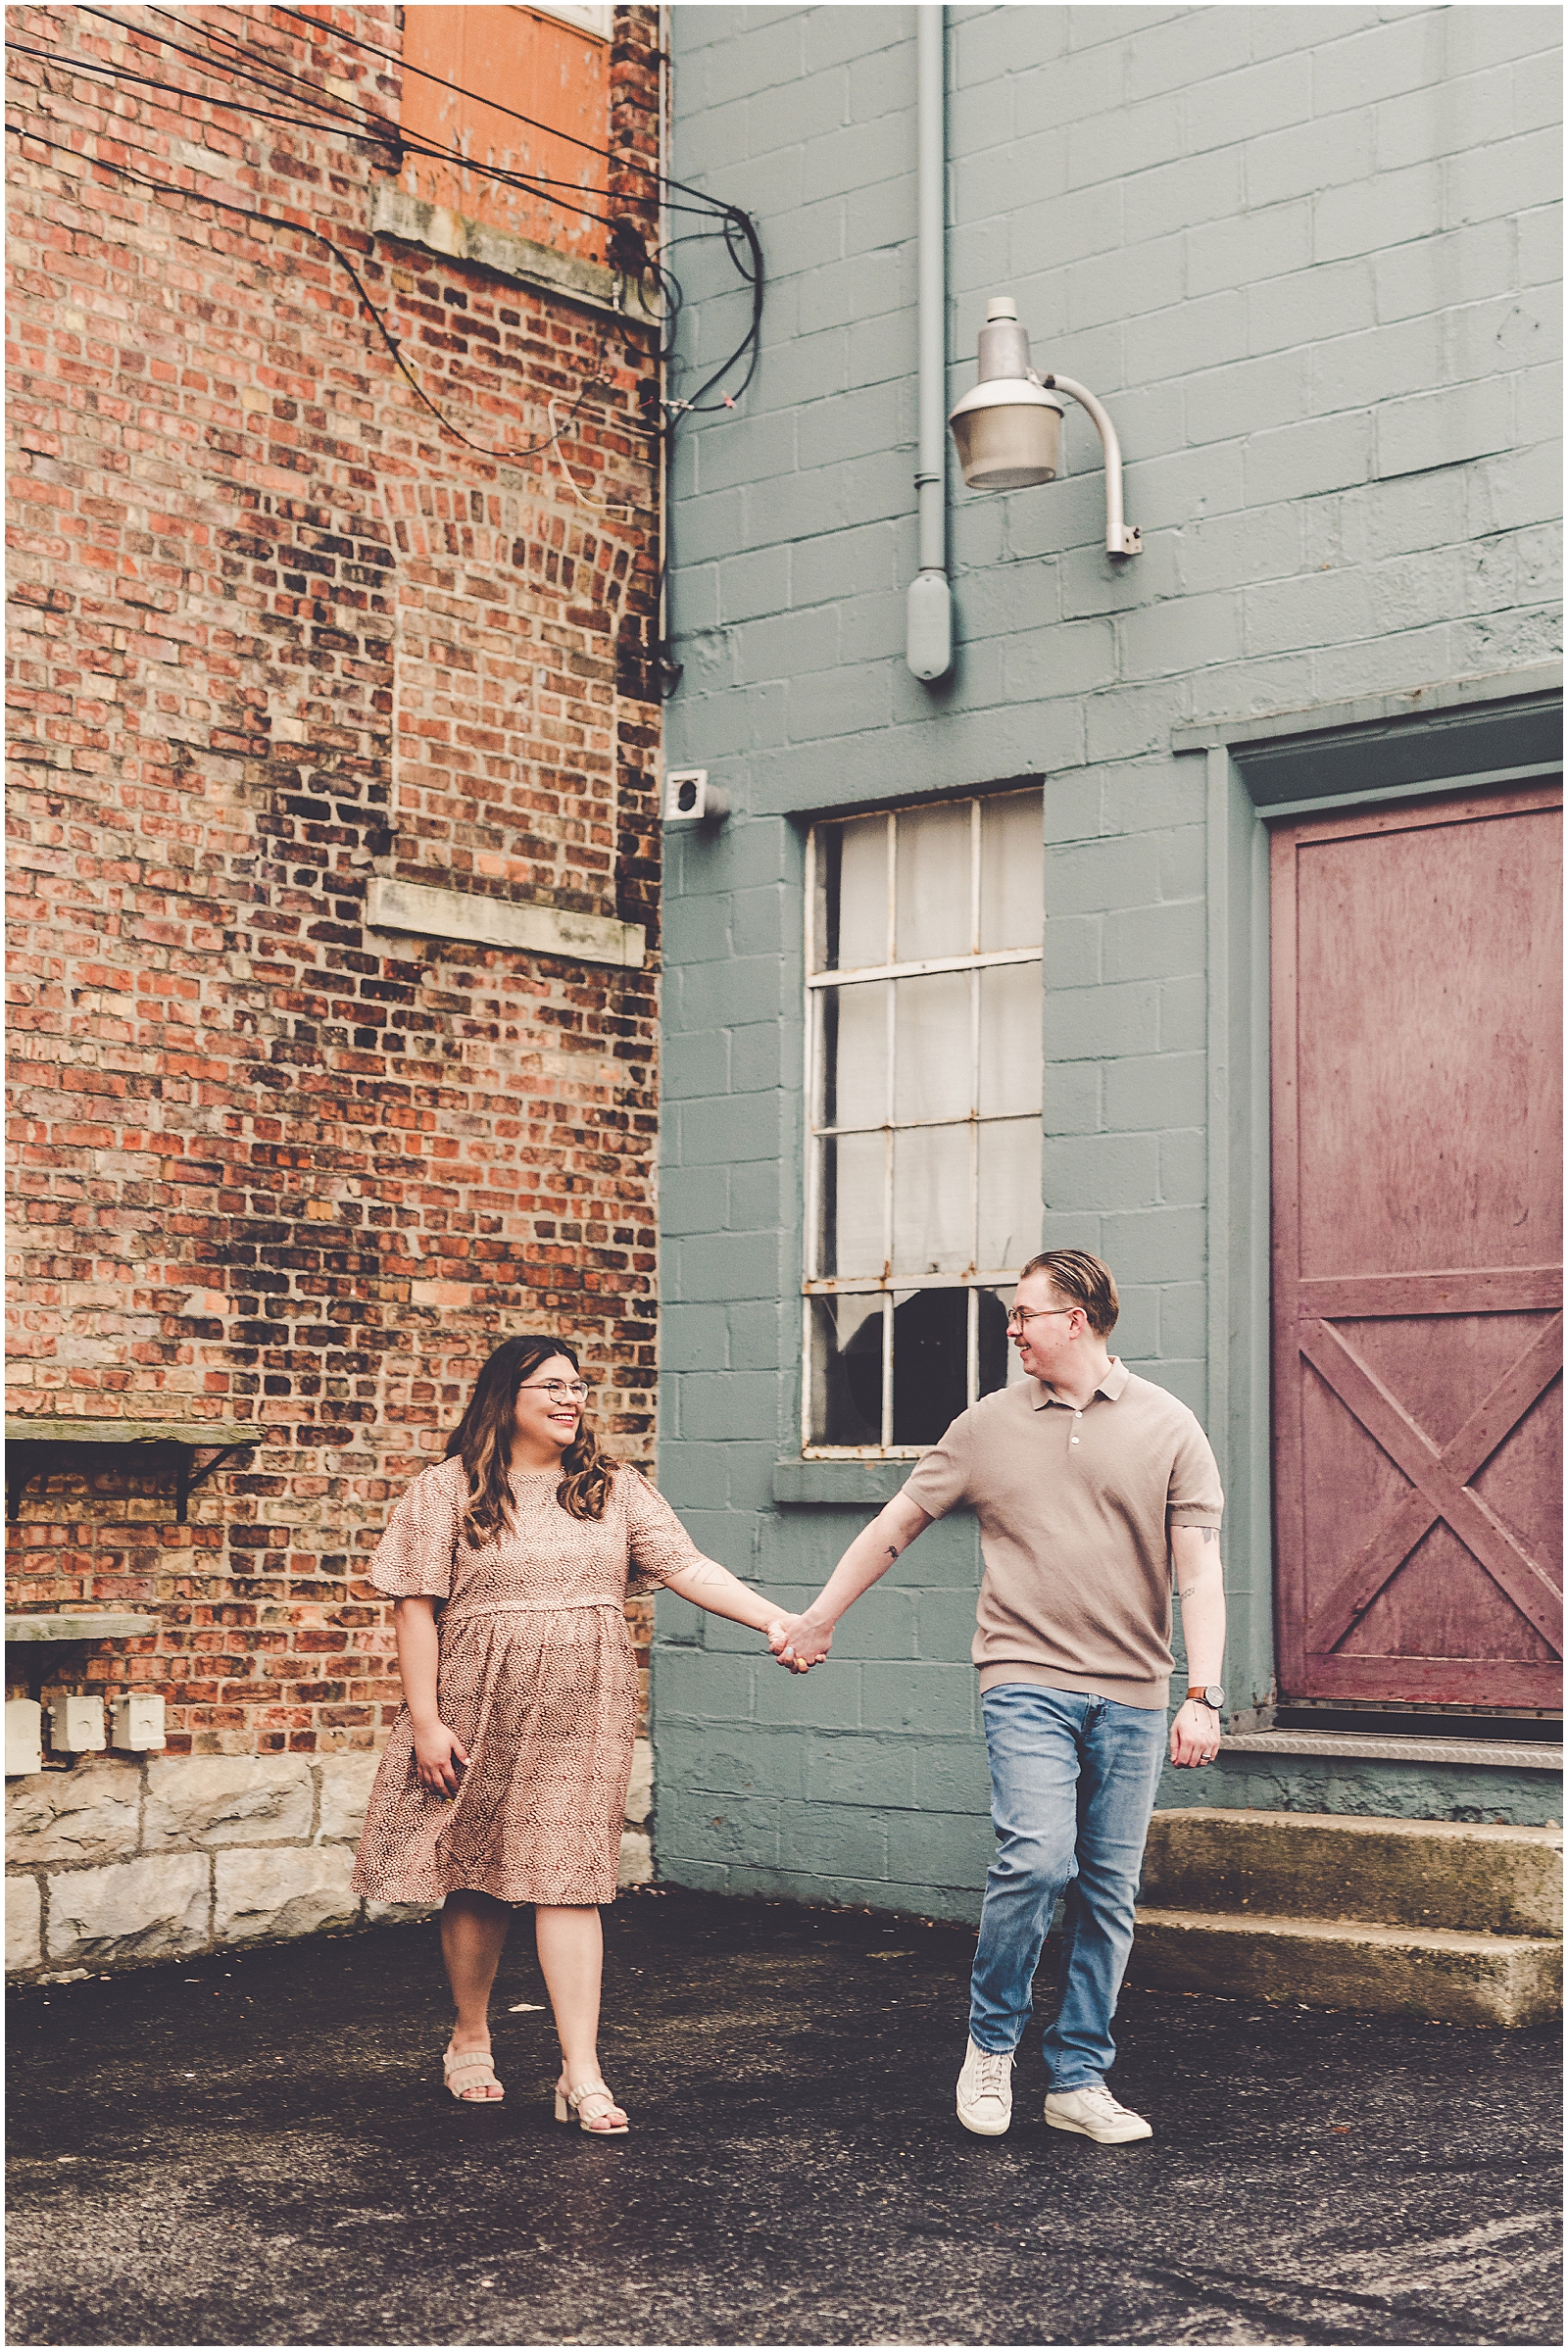 Spring couples session in Frankfort, Illinois with Chicagoland wedding photographer Kara Evans Photographer.